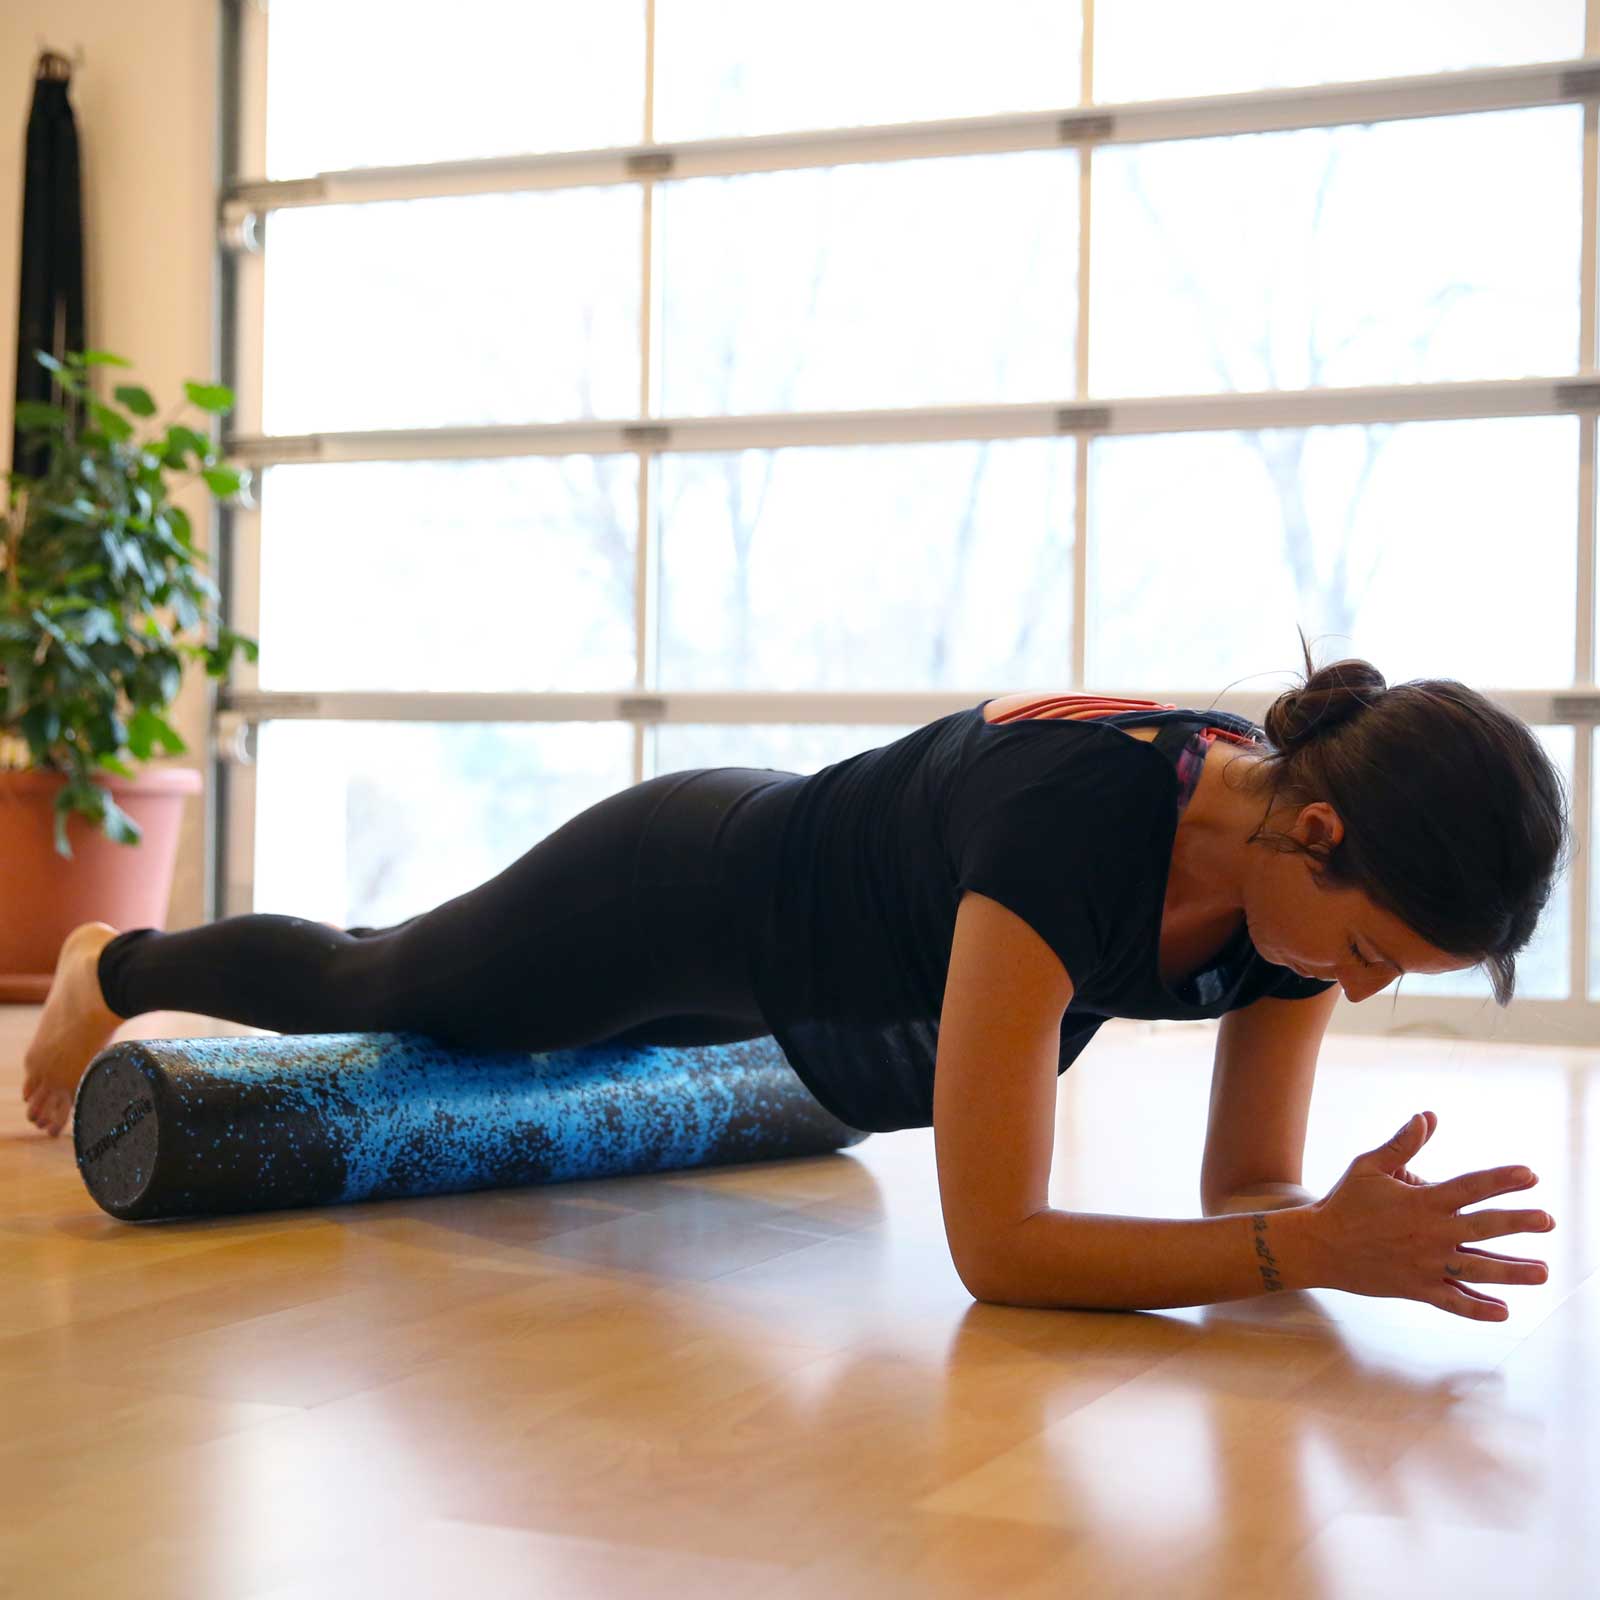 How to use a foam roller to relieve neck, back and knee pain